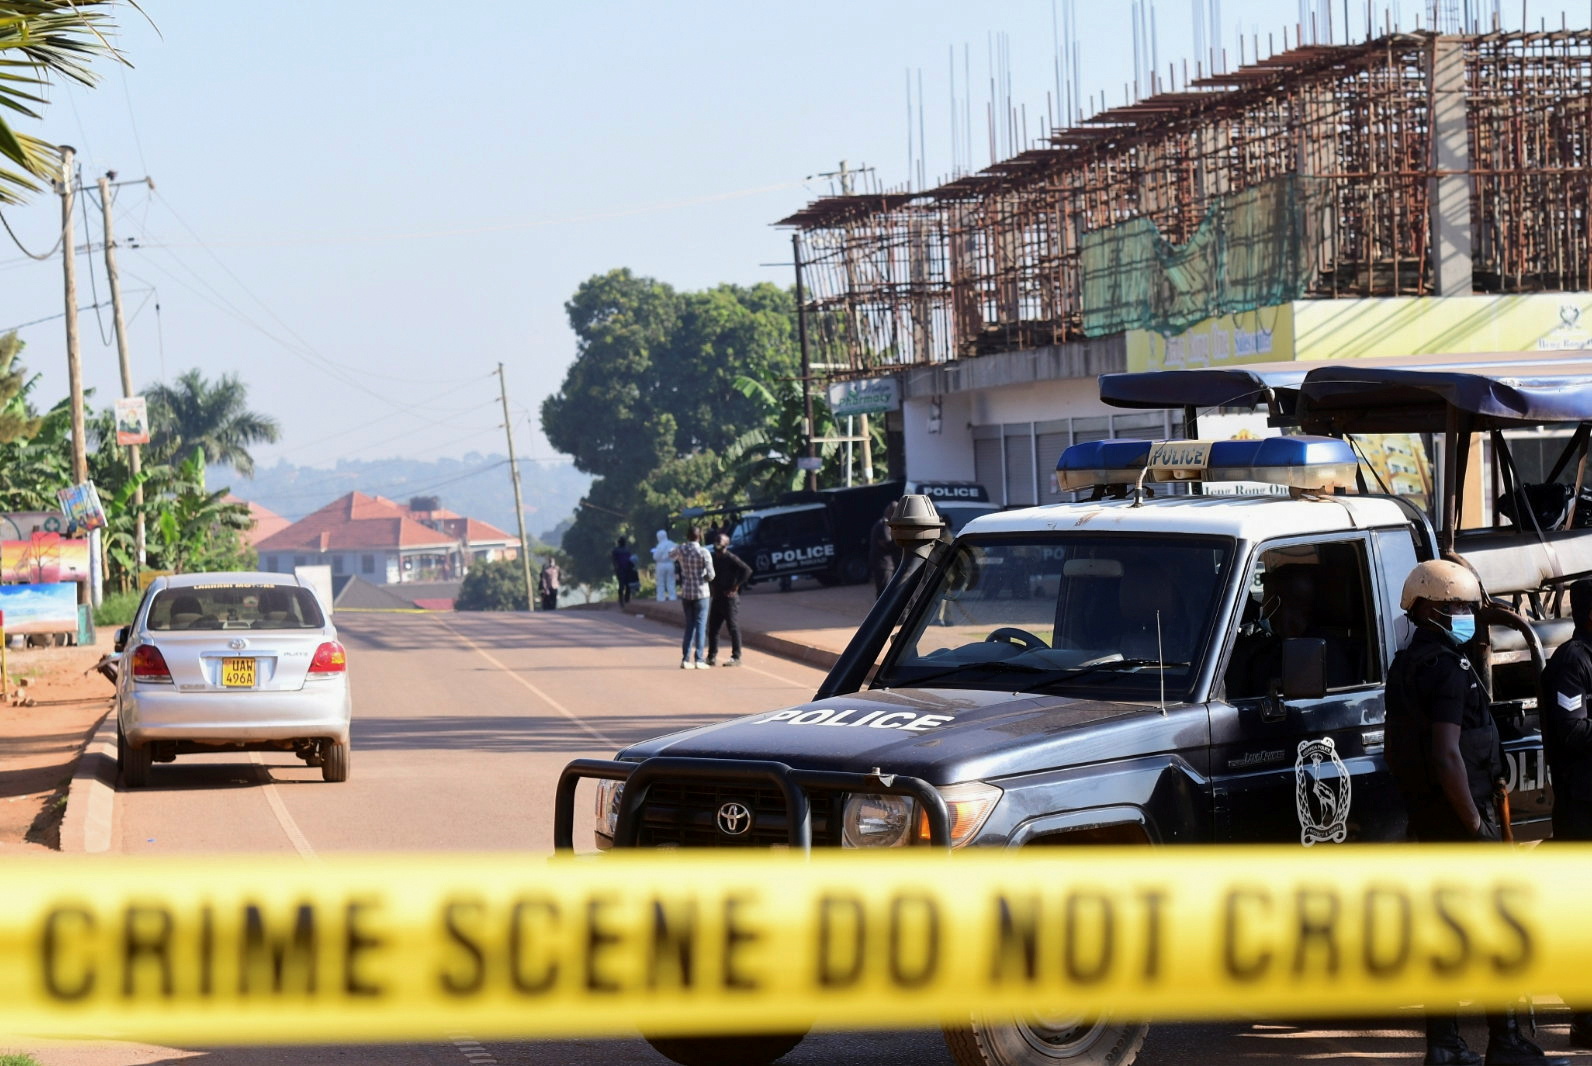 Ugandan police members secure the scene of an explosion in Komamboga, a suburb on the northern outskirts of Kampala, Uganda October 24, 2021. REUTERS/Abubaker Lubowa